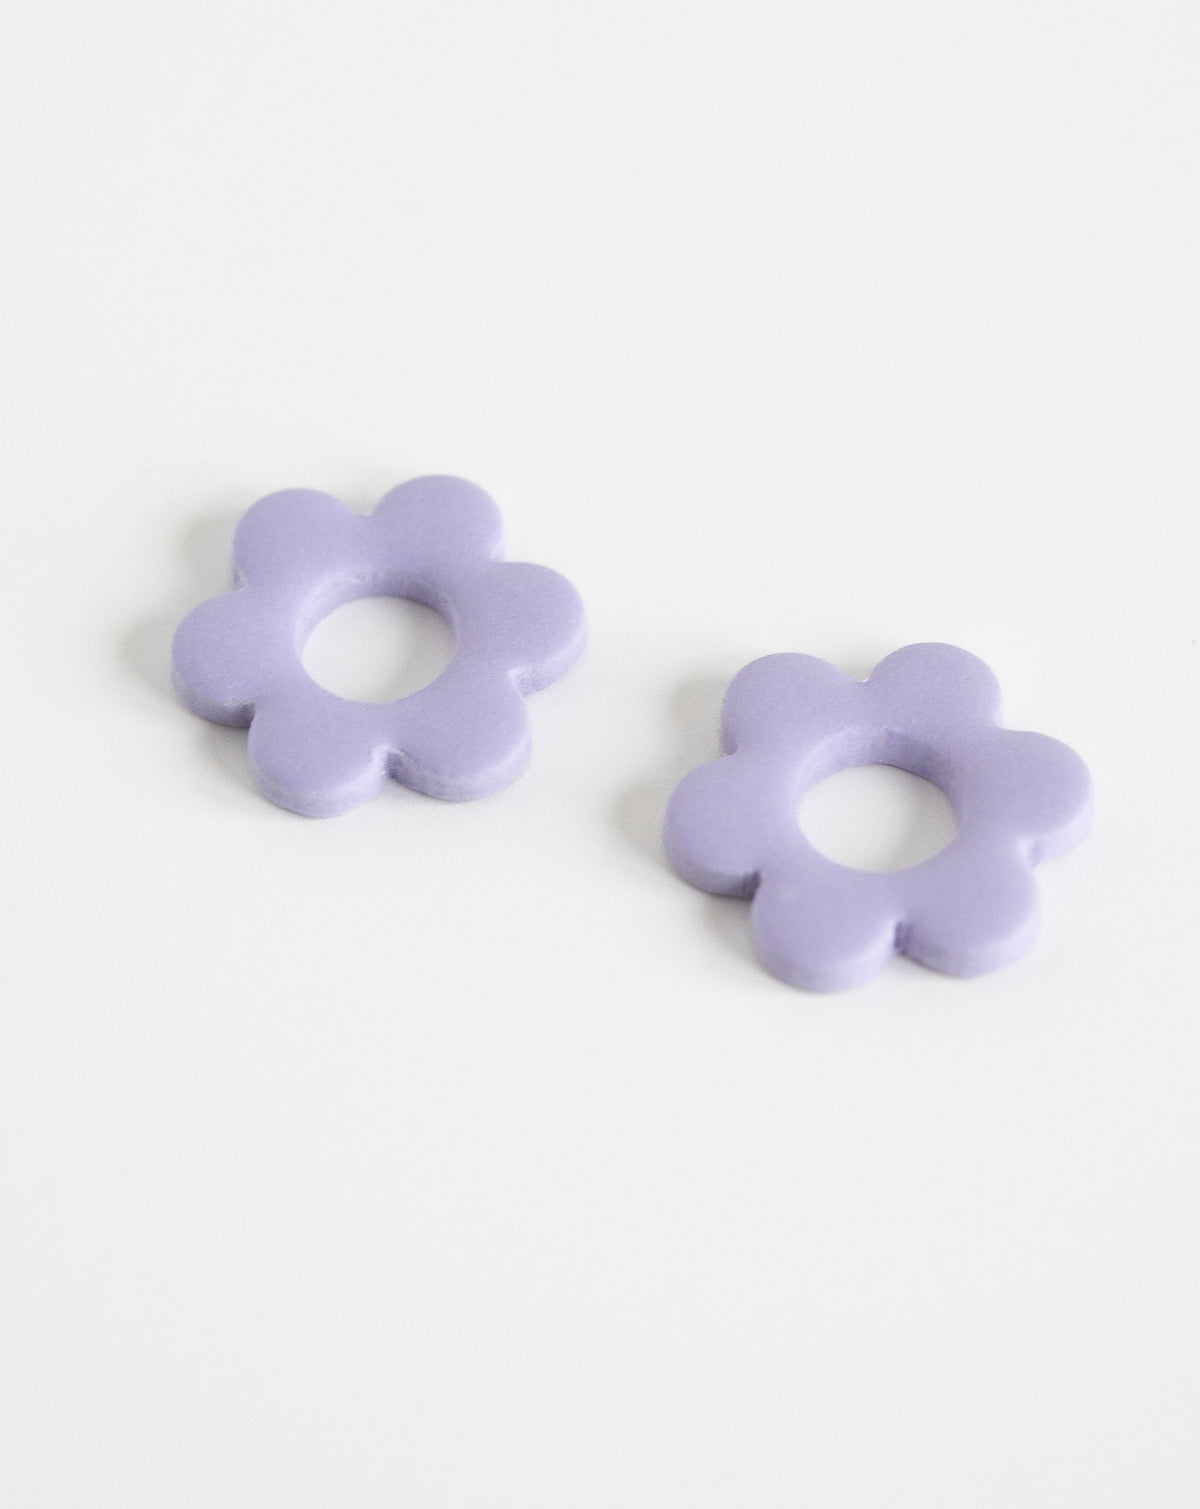 Goli Beads in Lilac color.